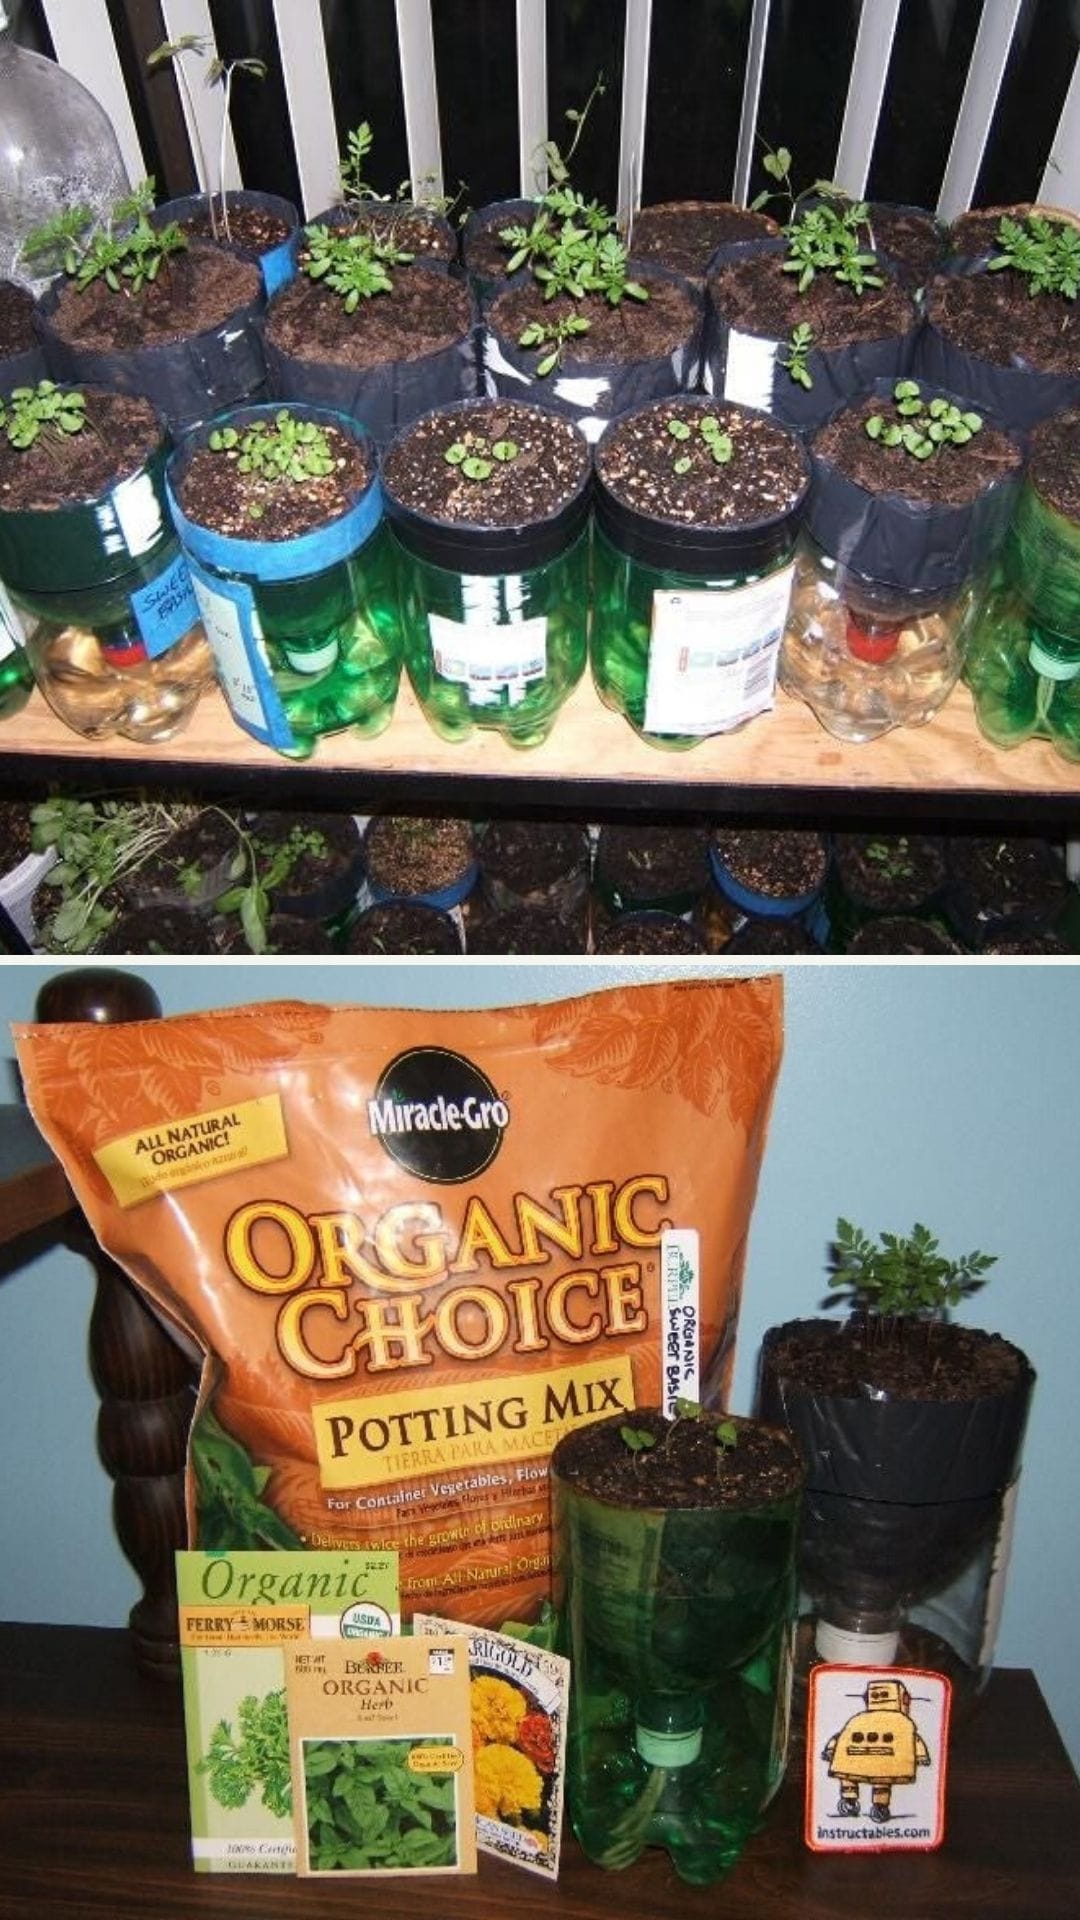 Herb self watering with recycled bottles